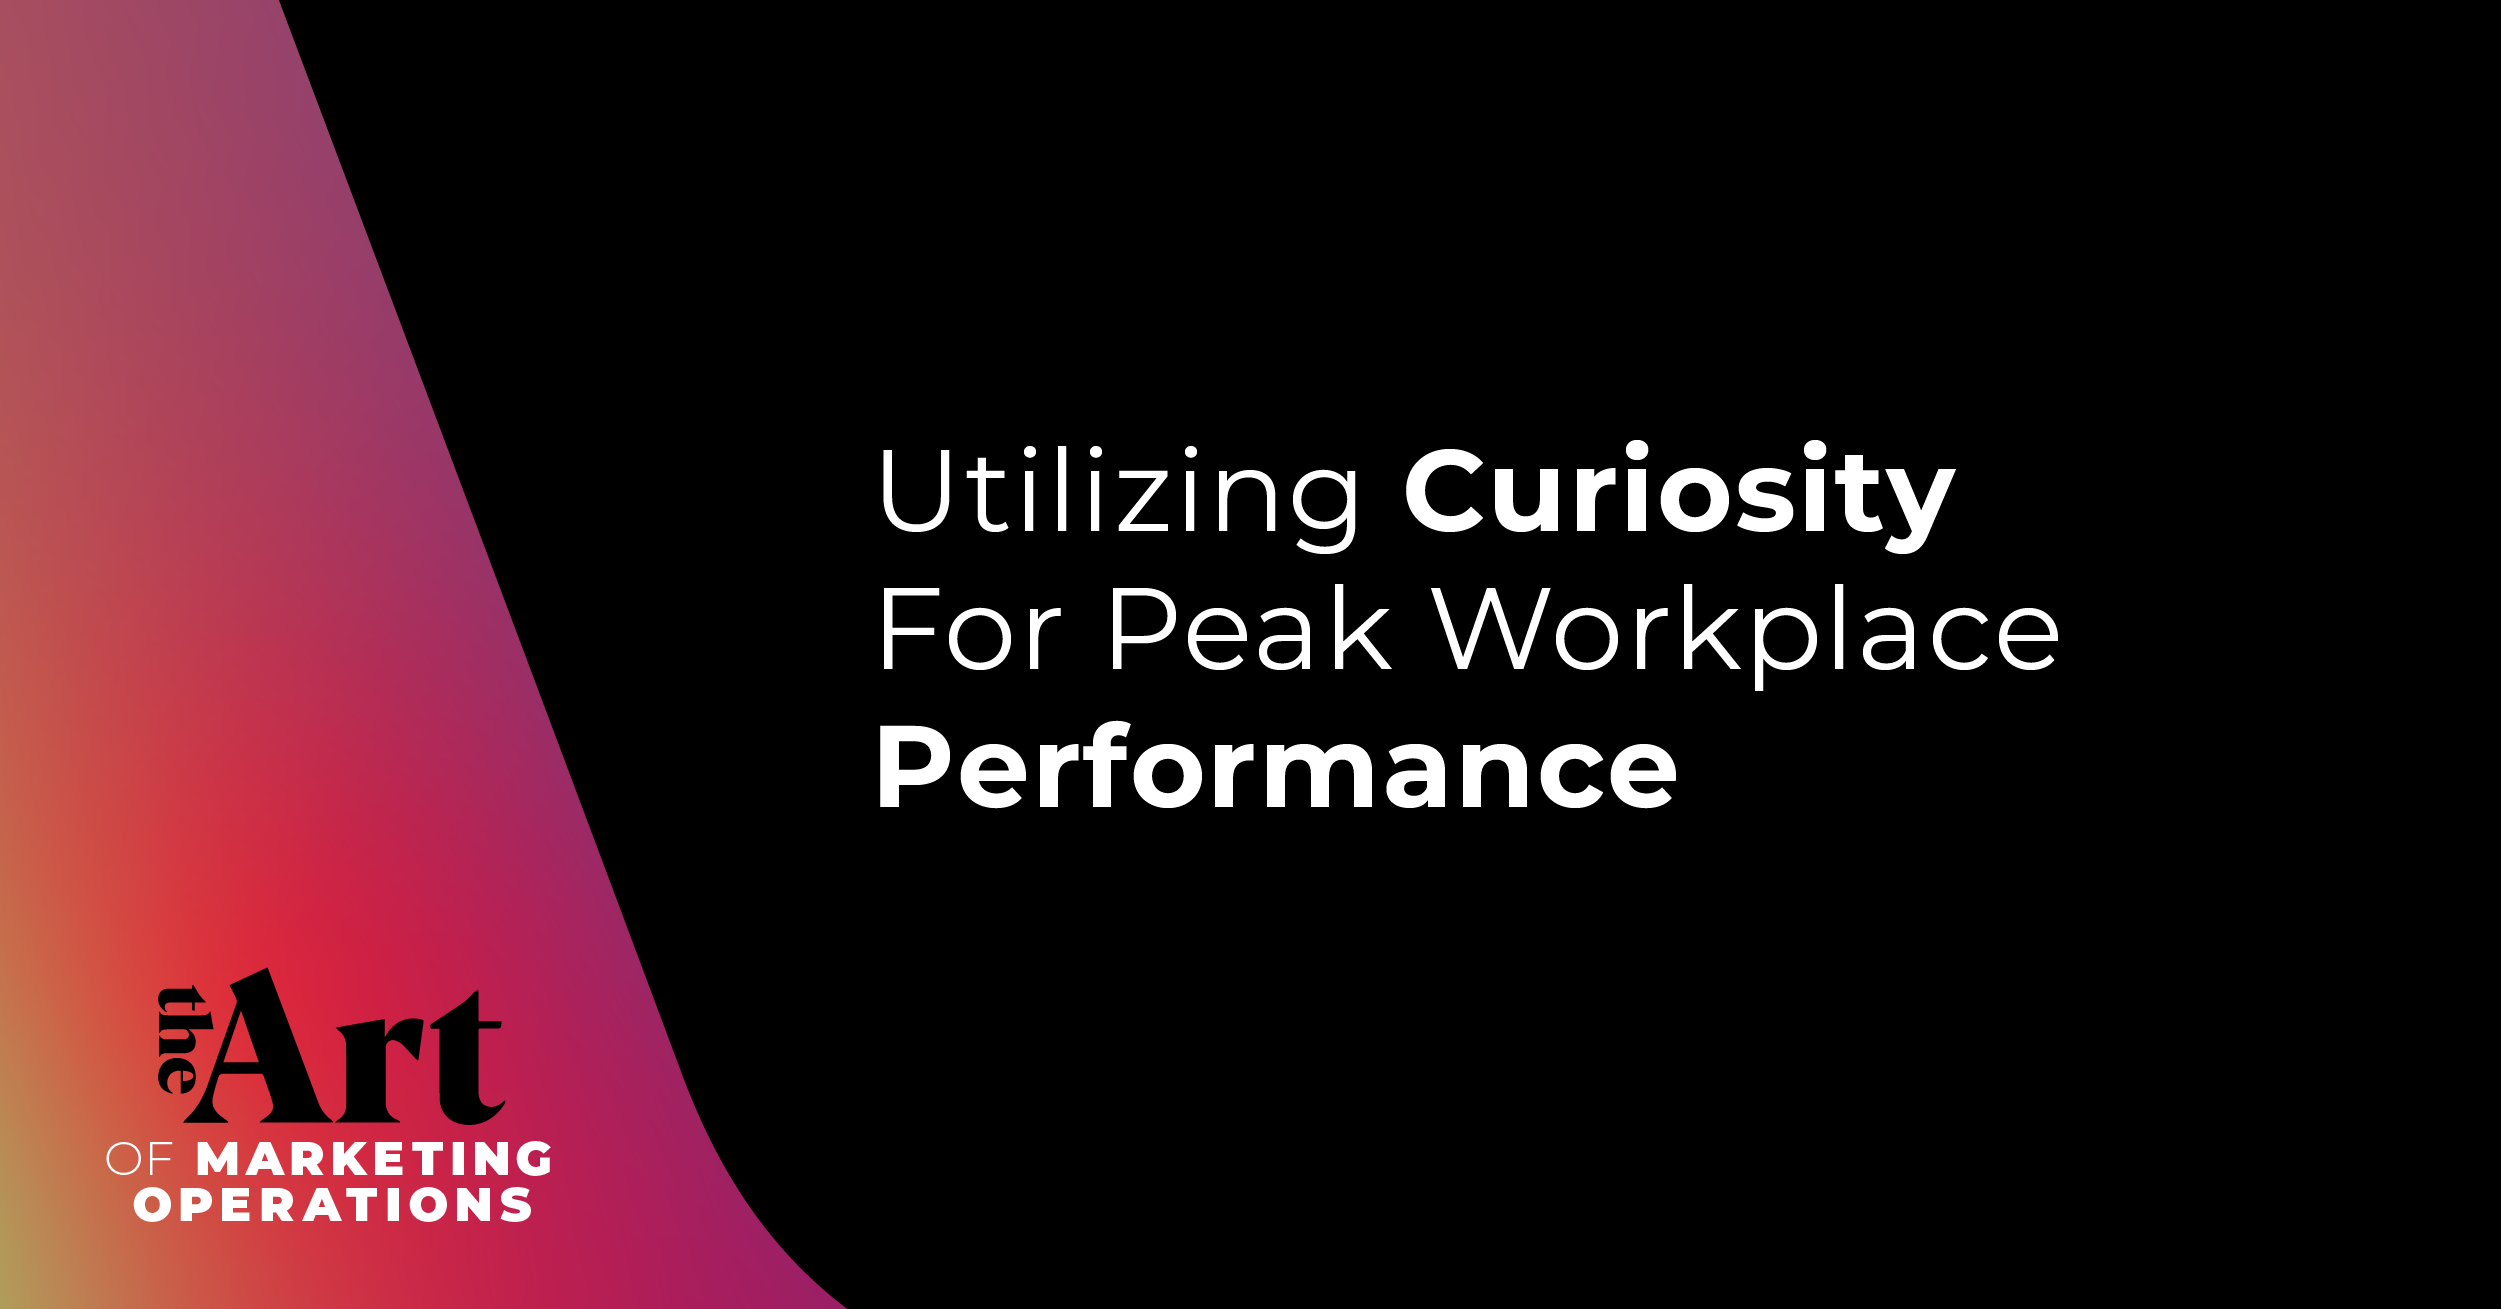 Featured image for article: Ep: 14 - Utilizing Curiosity For Peak Workplace Performance